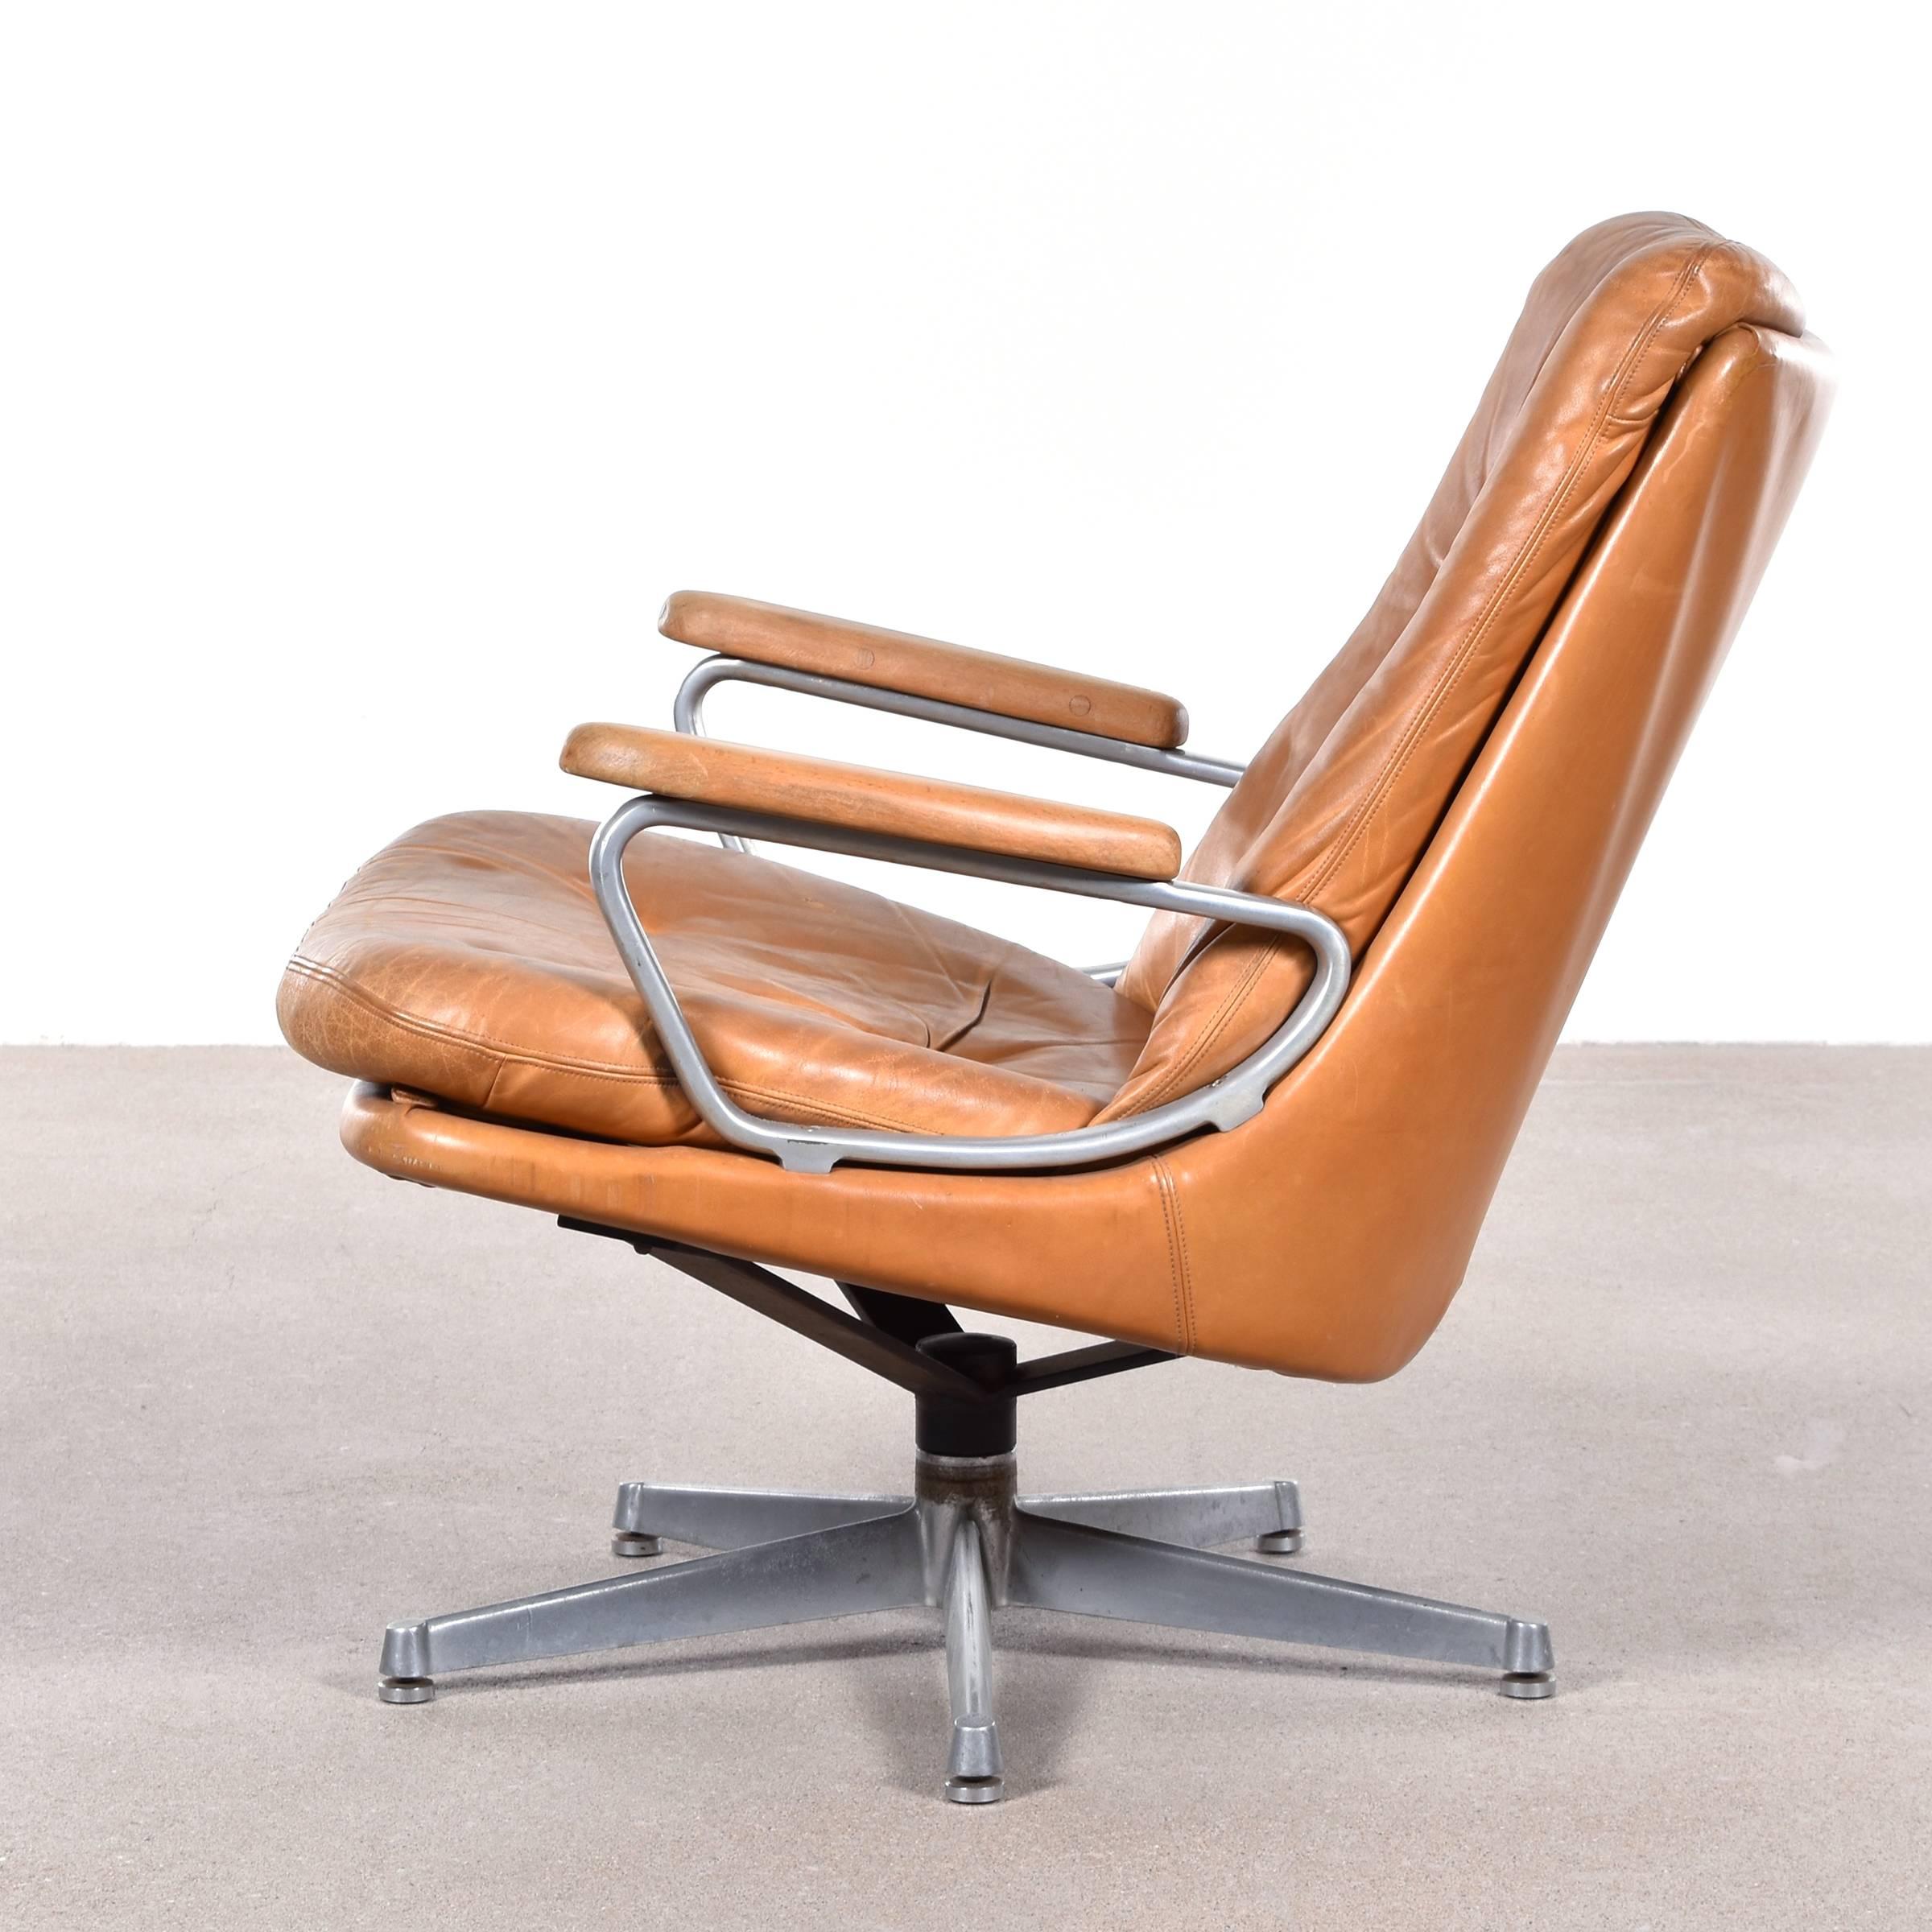 Comfortable swivel lounge chair by Andre Vandenbeuck for Strassle International. Heavy patina on cognac leather but still in god condition (Swiss quality). The leather can be restored or complete reupholstered if desired, please ask for